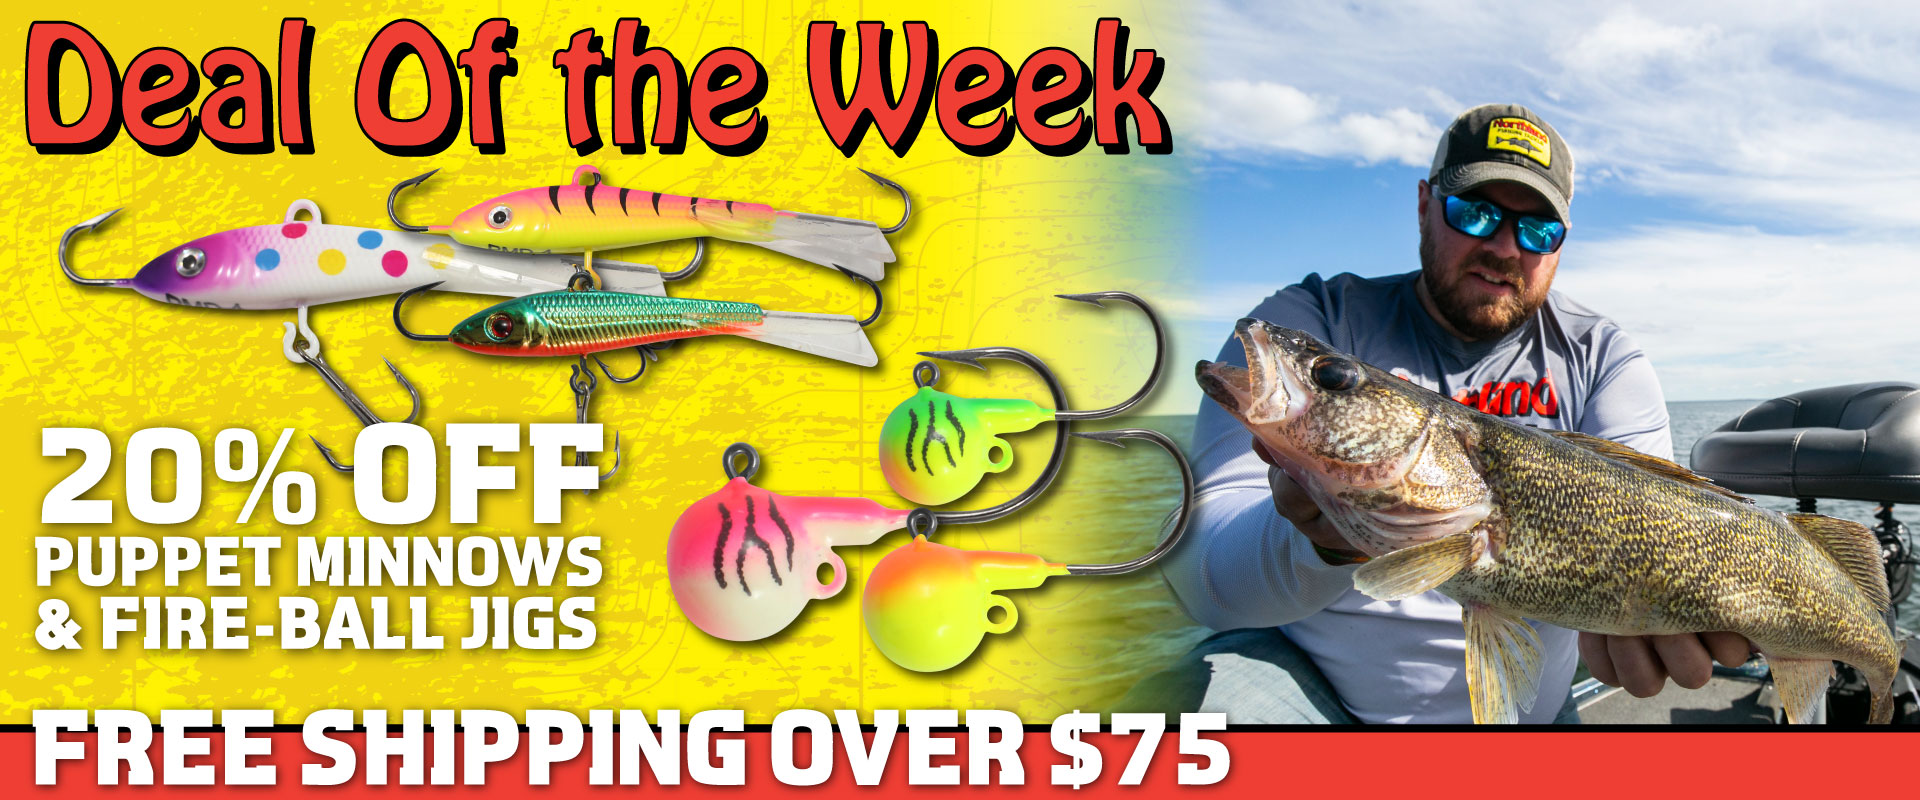 Fire-Ball Jig, Puppet Minnow, Deal of the Week, 20% off, Northland Fishing Tackle